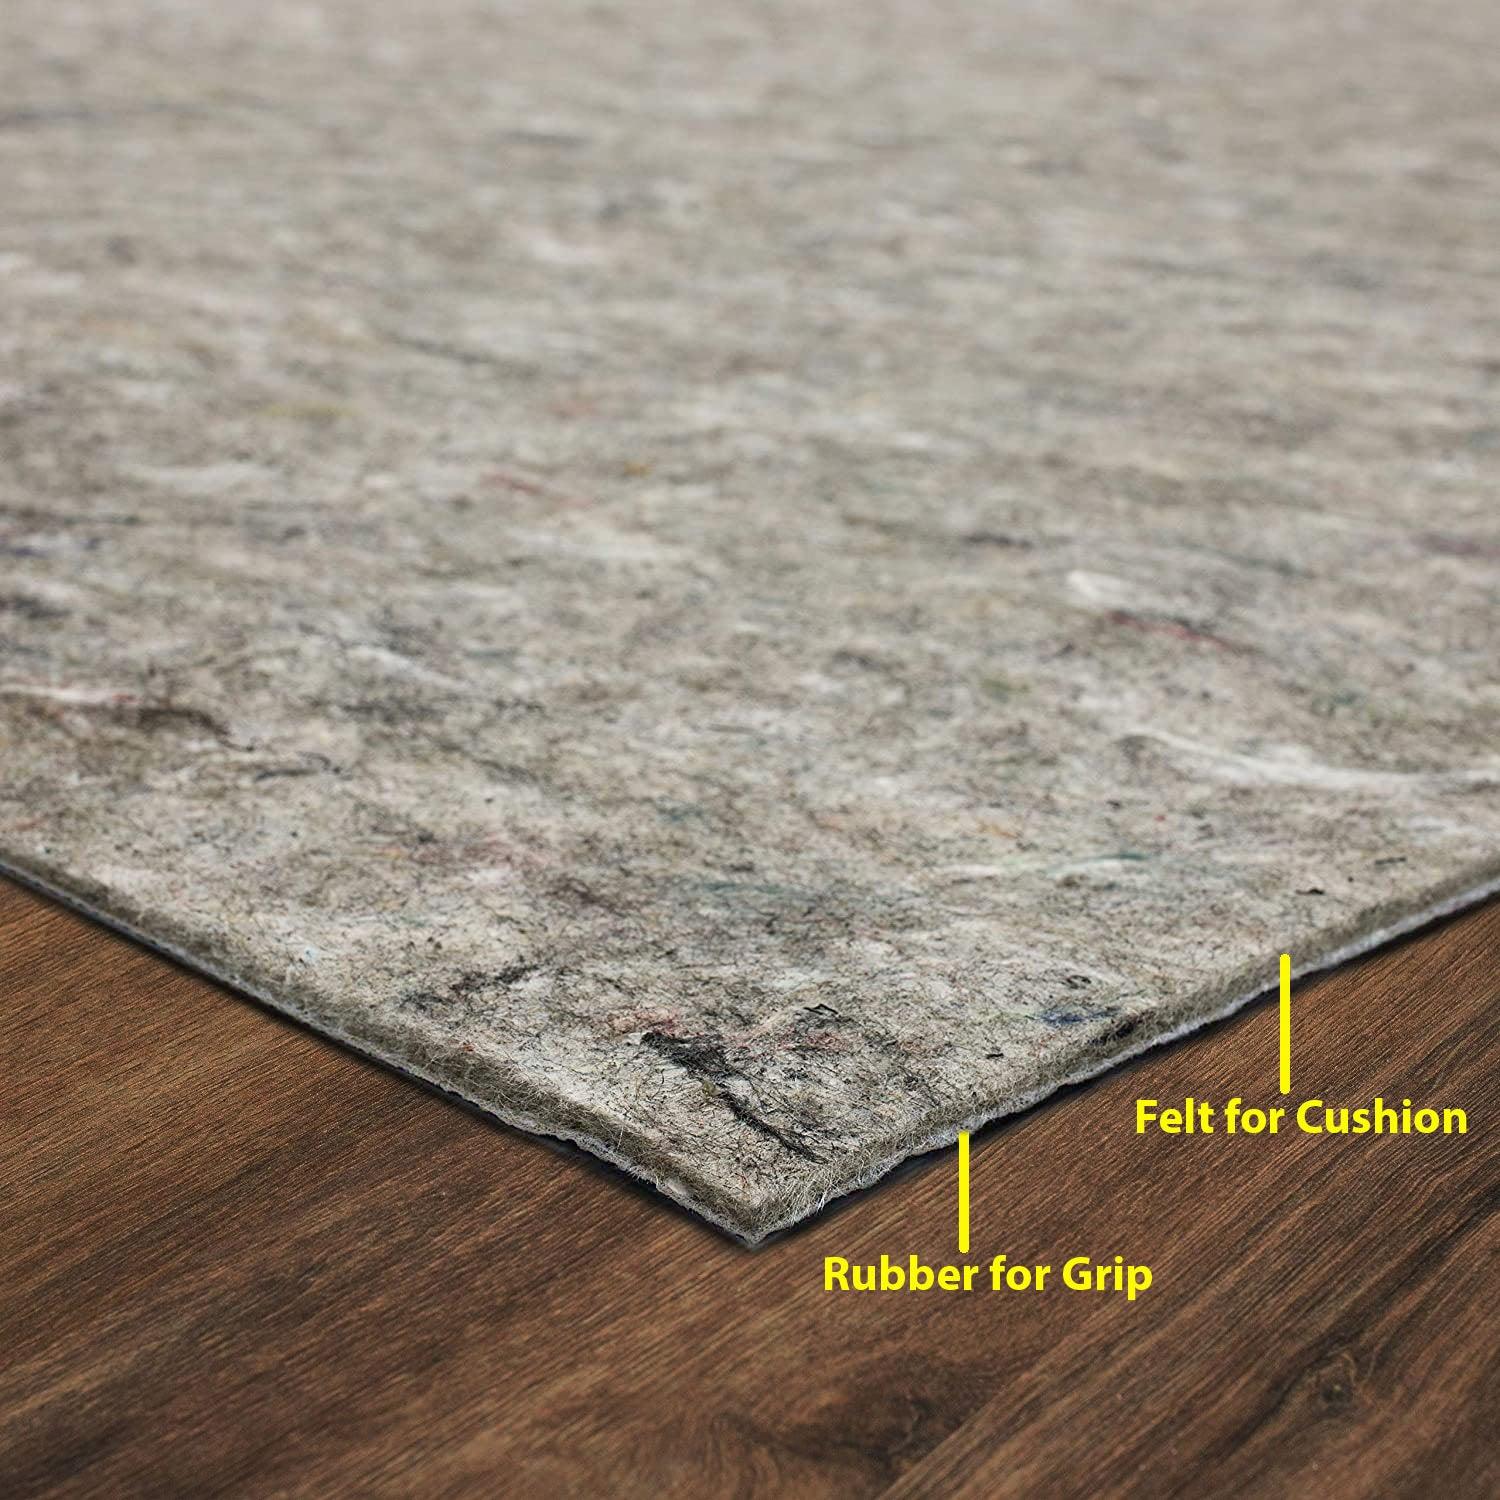 Dual Surface Felt Luxehold Non-Slip Rug Pad (0.275), 2x3